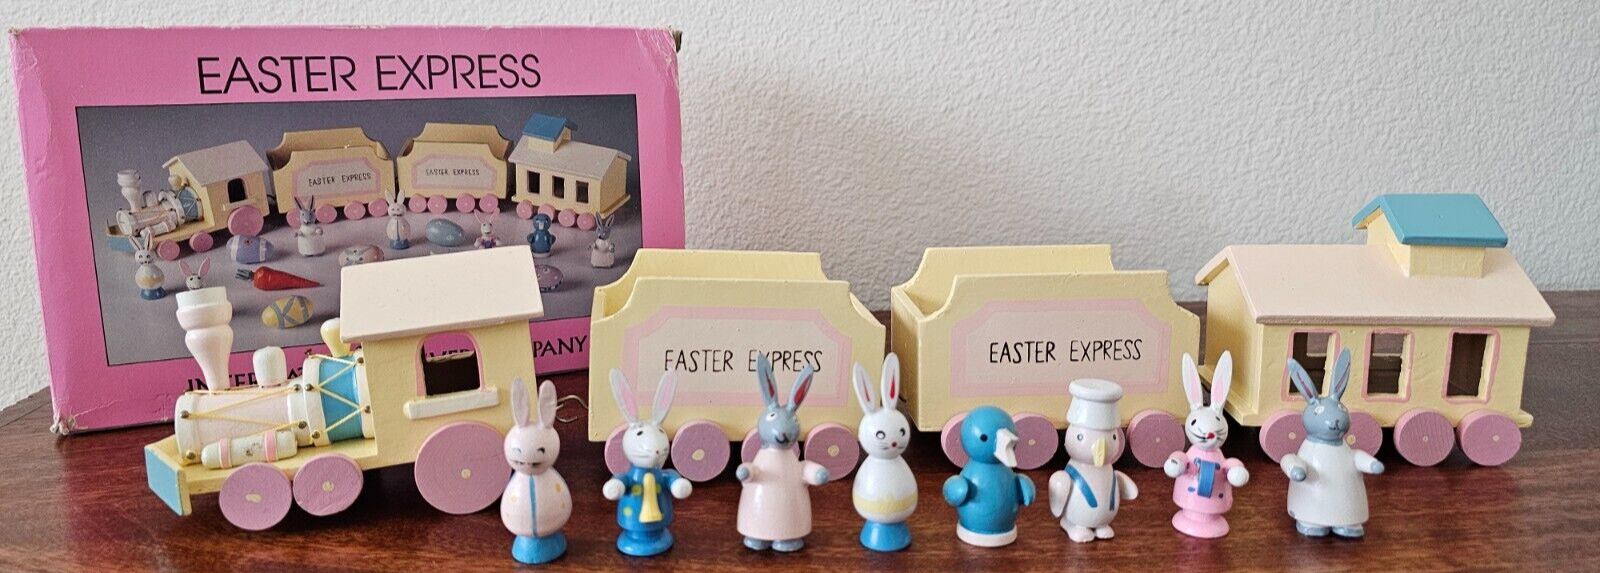 1993 Easter Express By International Silver Co. 20 Piece Set Wooden Train Rabbit